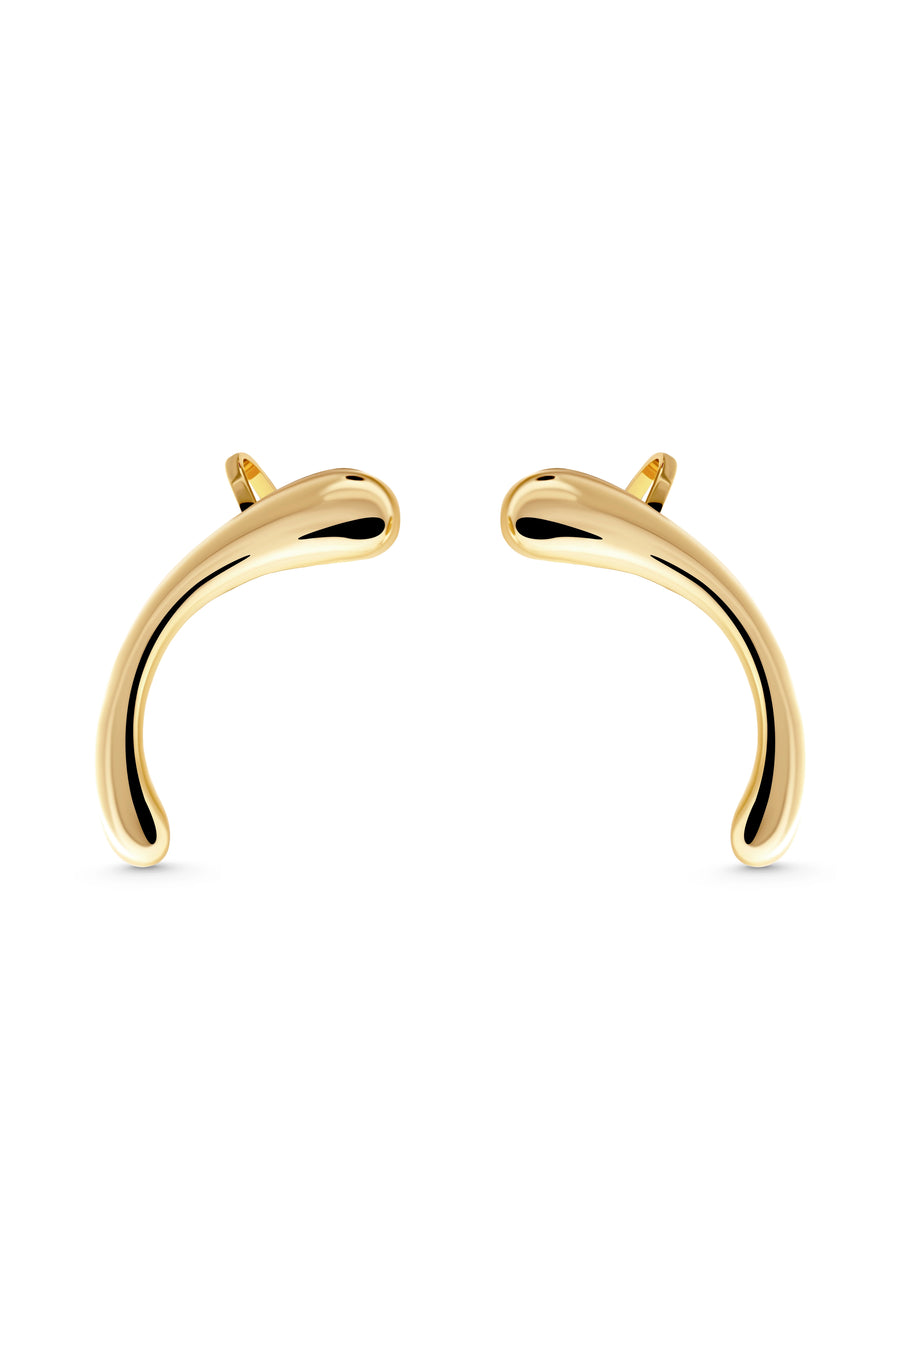 MOOD Ear Cuffs. Bow-shaped clip-on ear cuffs, no piercing needed, 18K gold vermeil, handmade, hypoallergenic, water-resistant